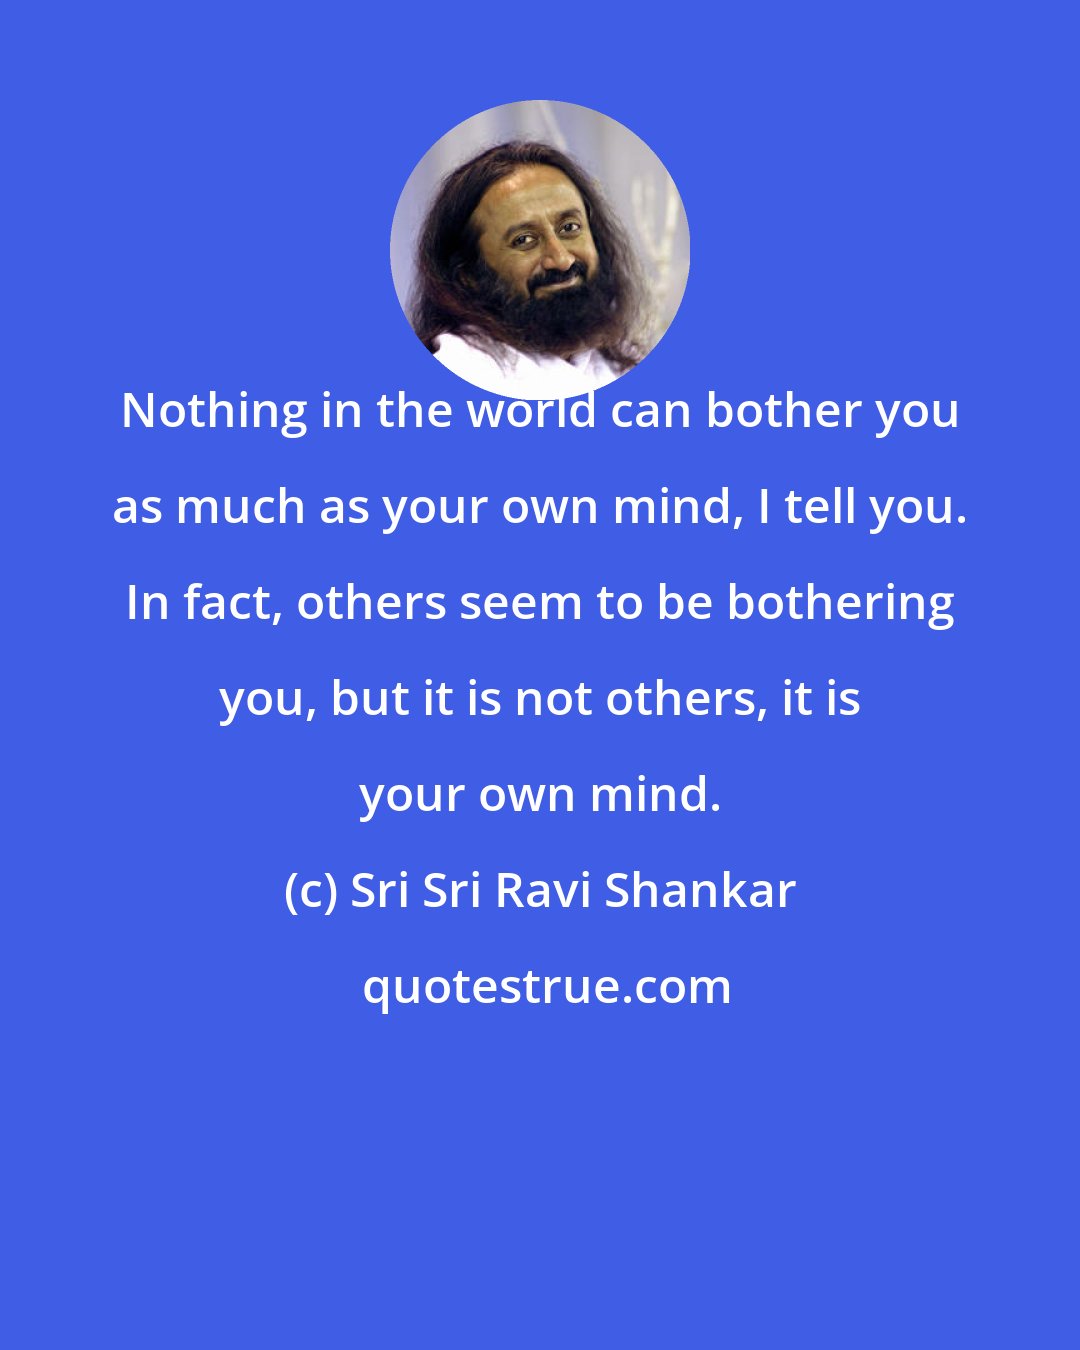 Sri Sri Ravi Shankar: Nothing in the world can bother you as much as your own mind, I tell you. In fact, others seem to be bothering you, but it is not others, it is your own mind.